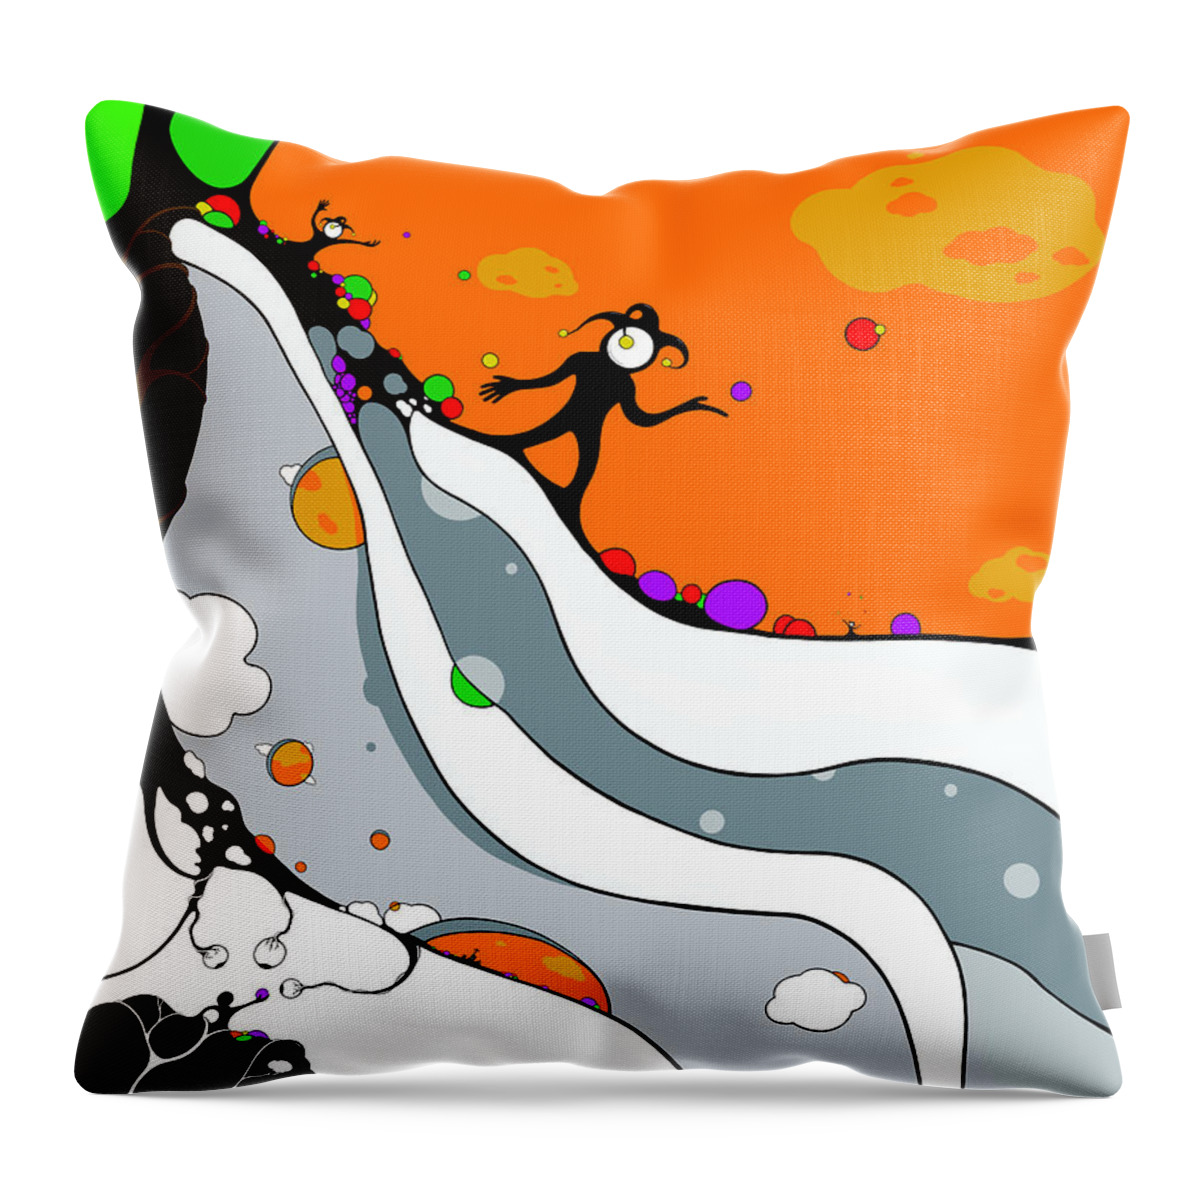 Avatar Throw Pillow featuring the drawing Thoughtful Jesters by Craig Tilley